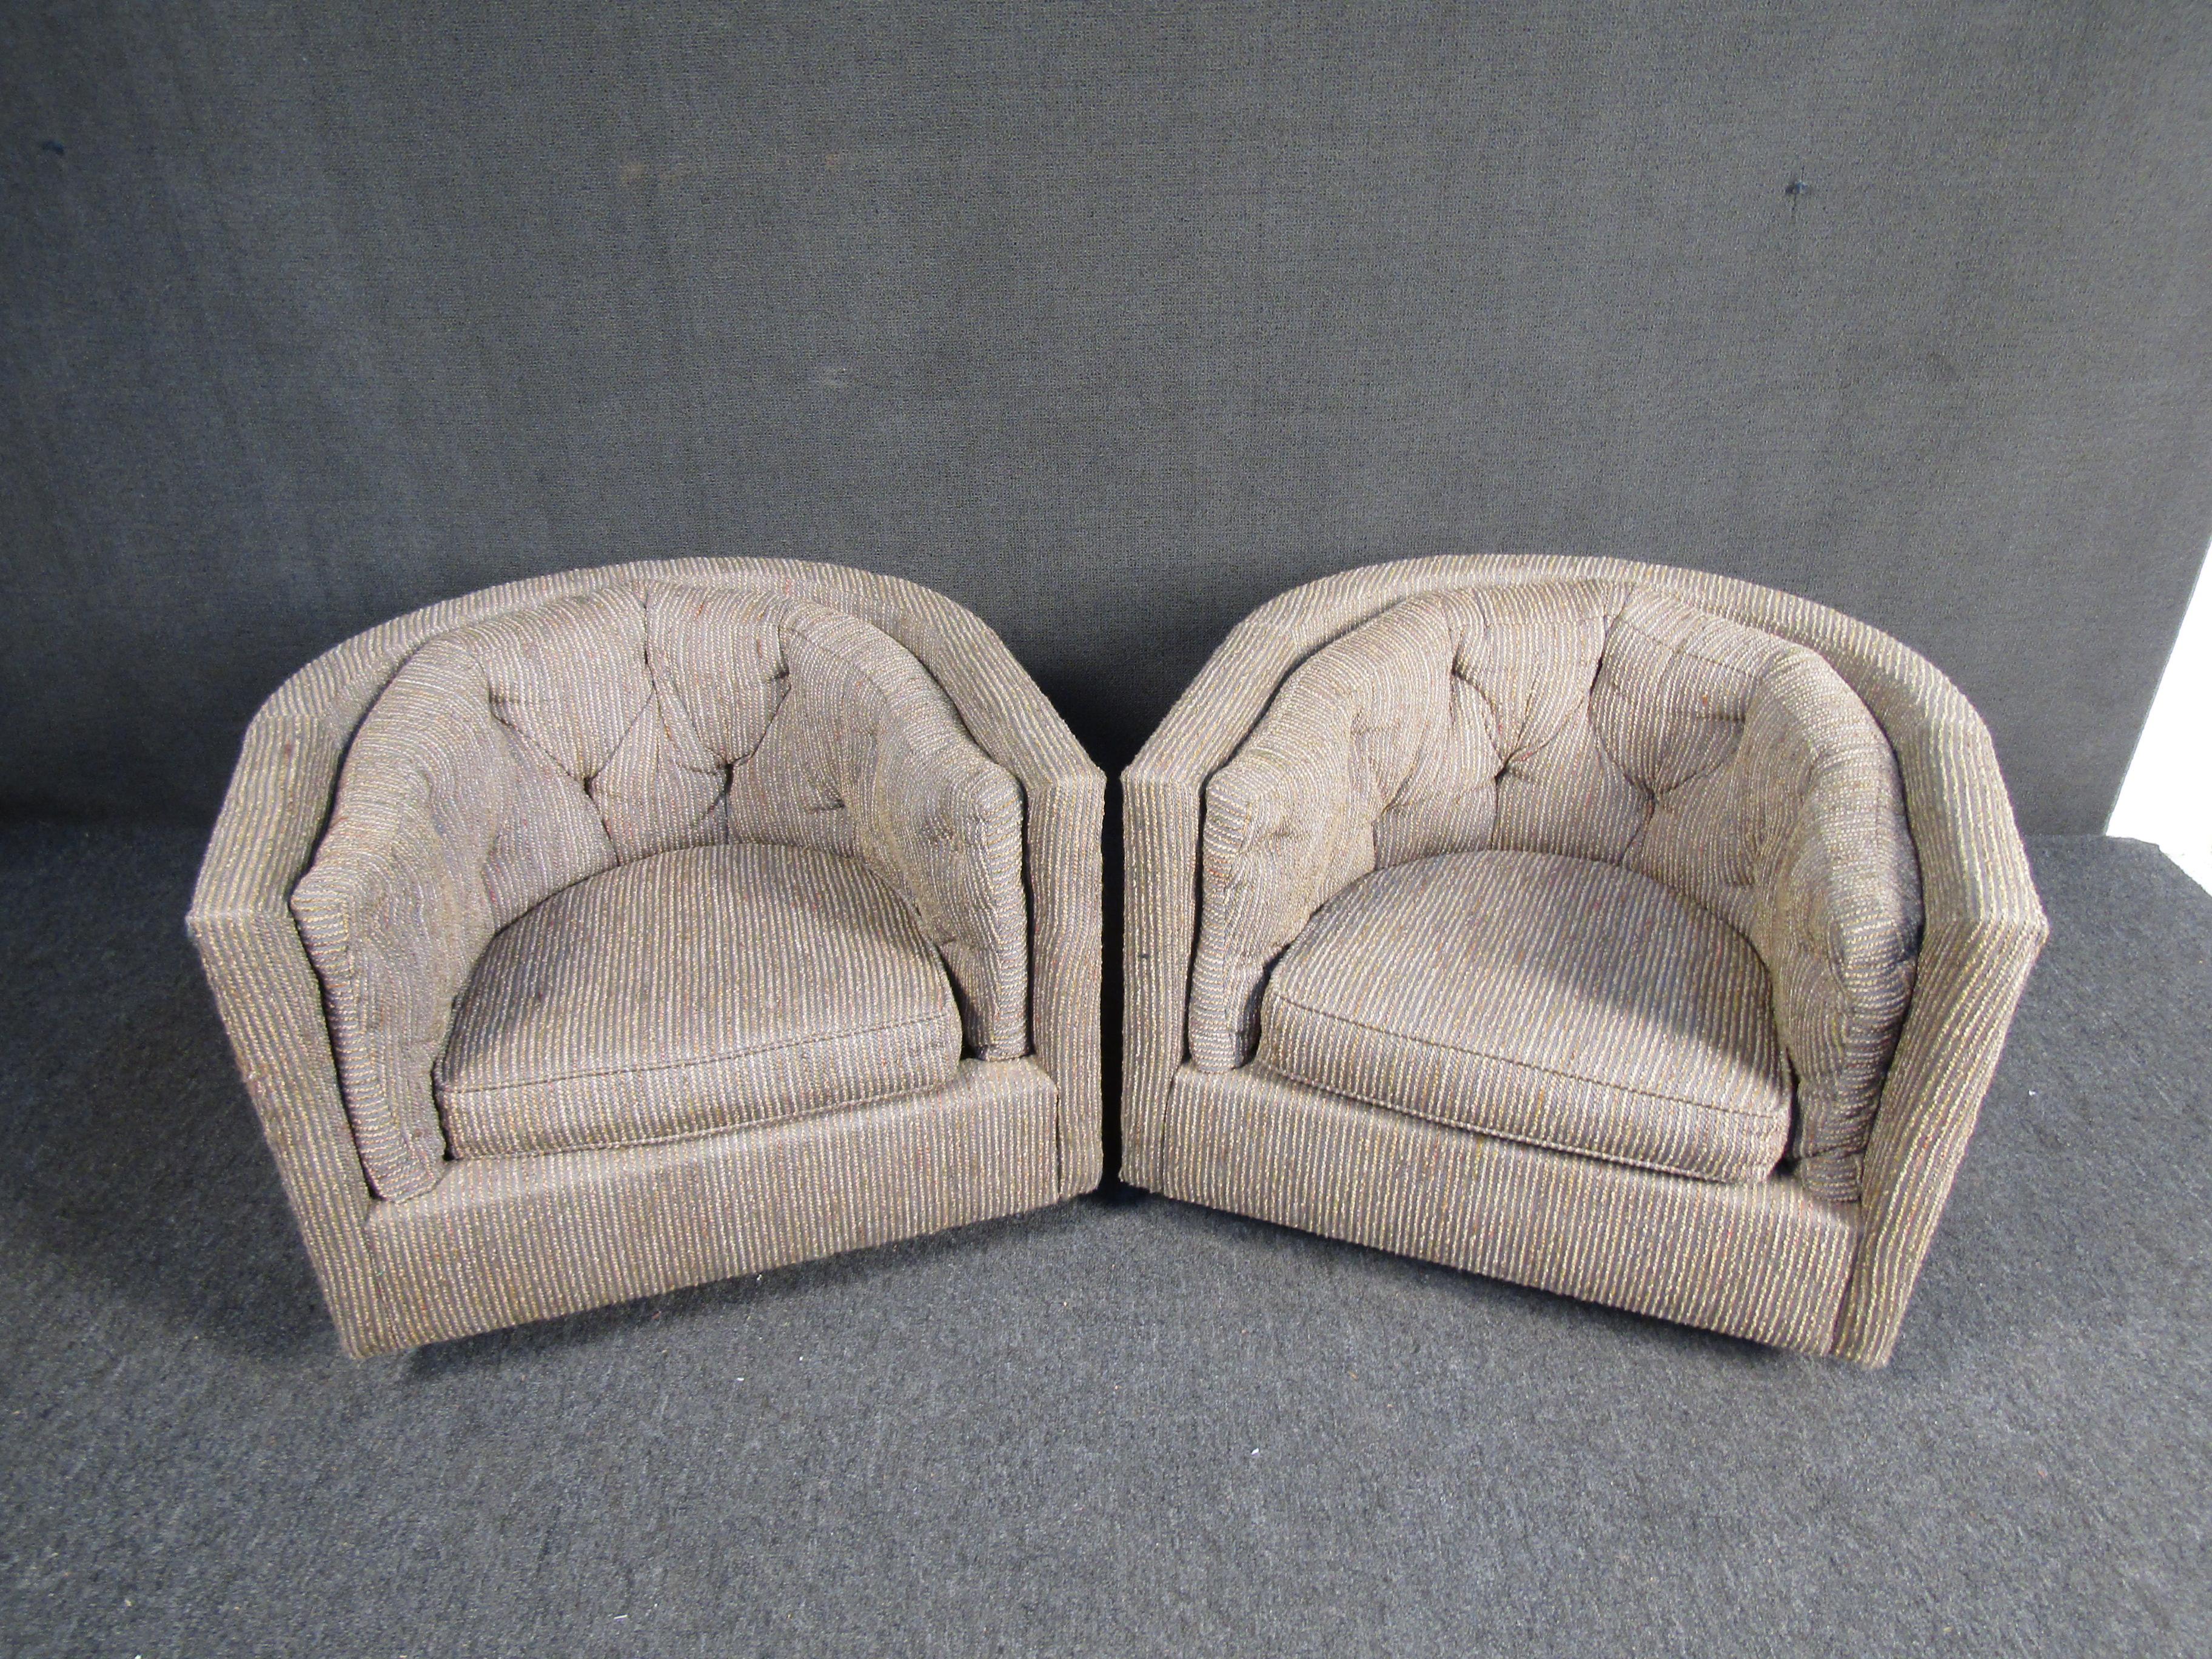 Pair of vintage Thayer Coggin fabric swivel tub chairs. These mid-century tub chairs are covered in a stylish olive and blue threaded fabric with tufted backs, and also swivel for convenience. If you need chairs with a vintage look for a small space